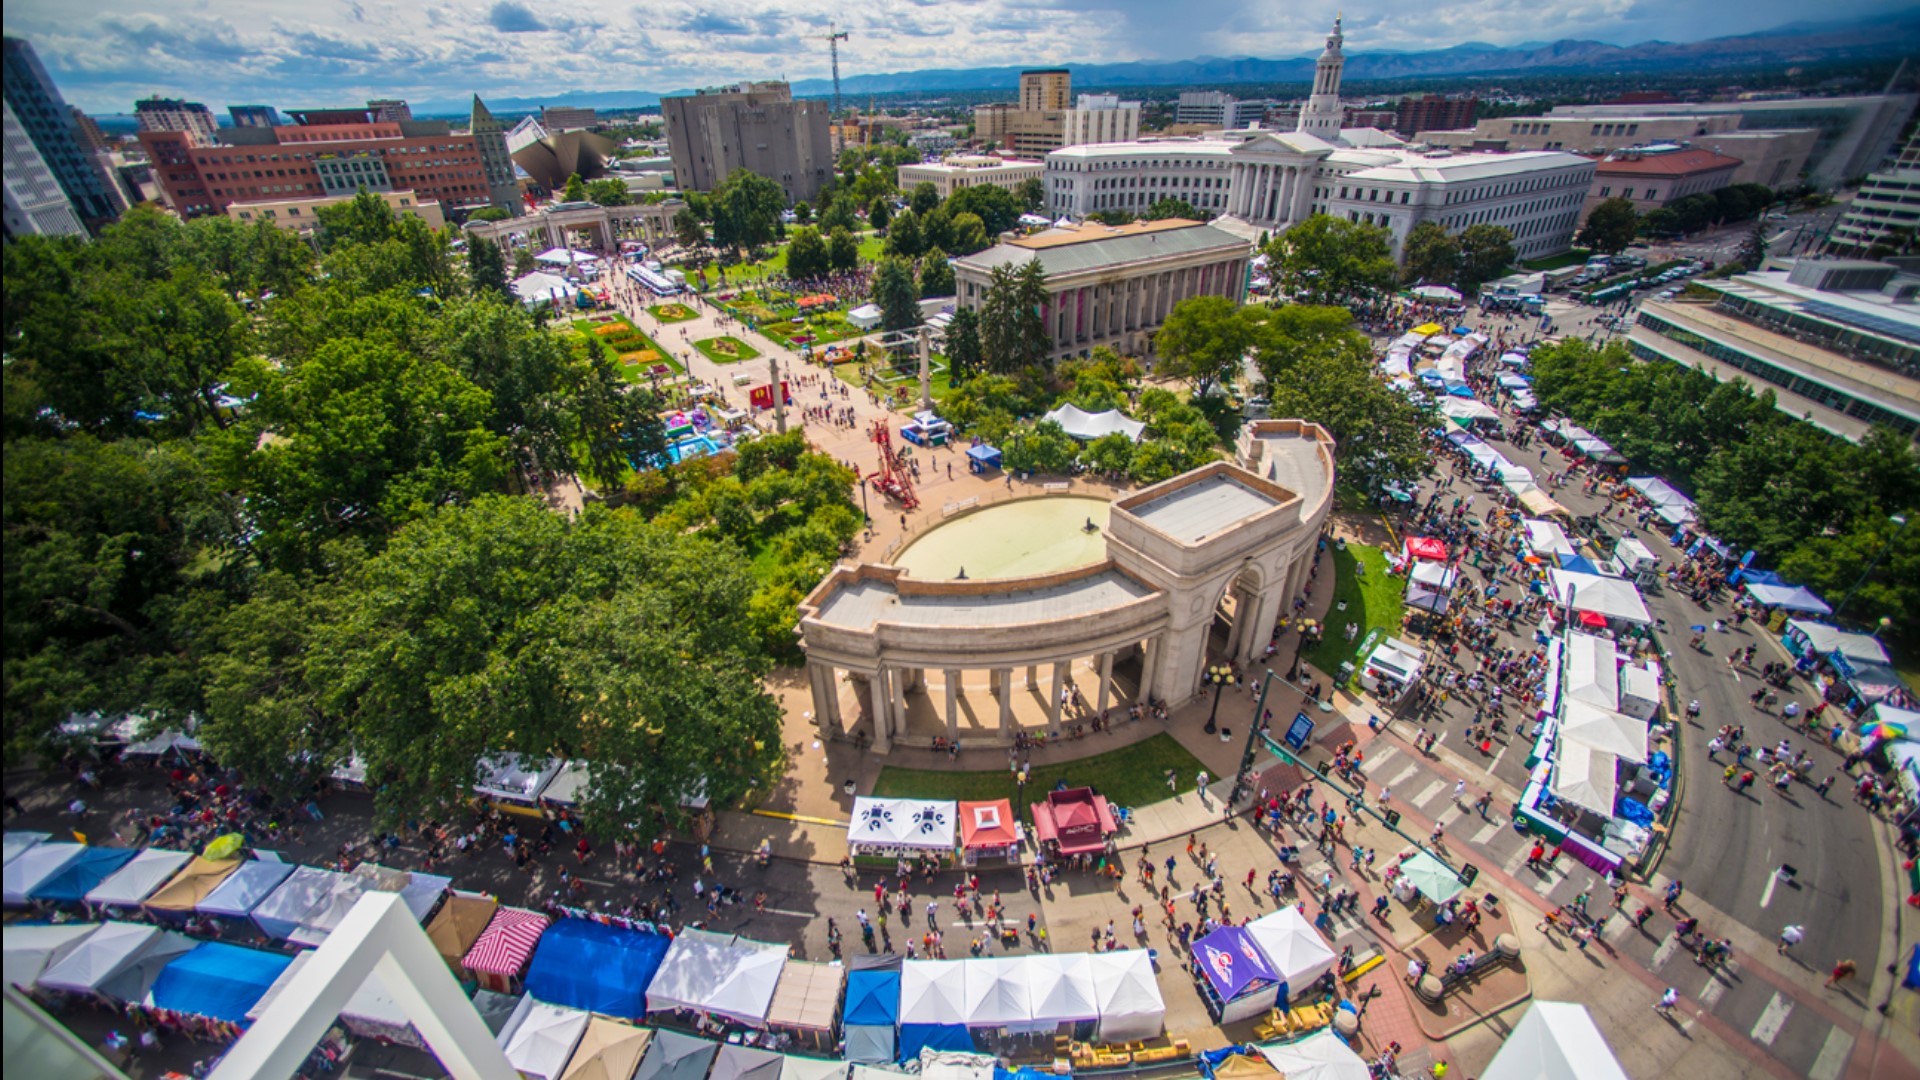 The 2019 'A Taste of Colorado' — the huge three-day food and music festival — returns to Denver's Civic Center Park from Saturday, Aug. 31 to Monday, Sept. 2.